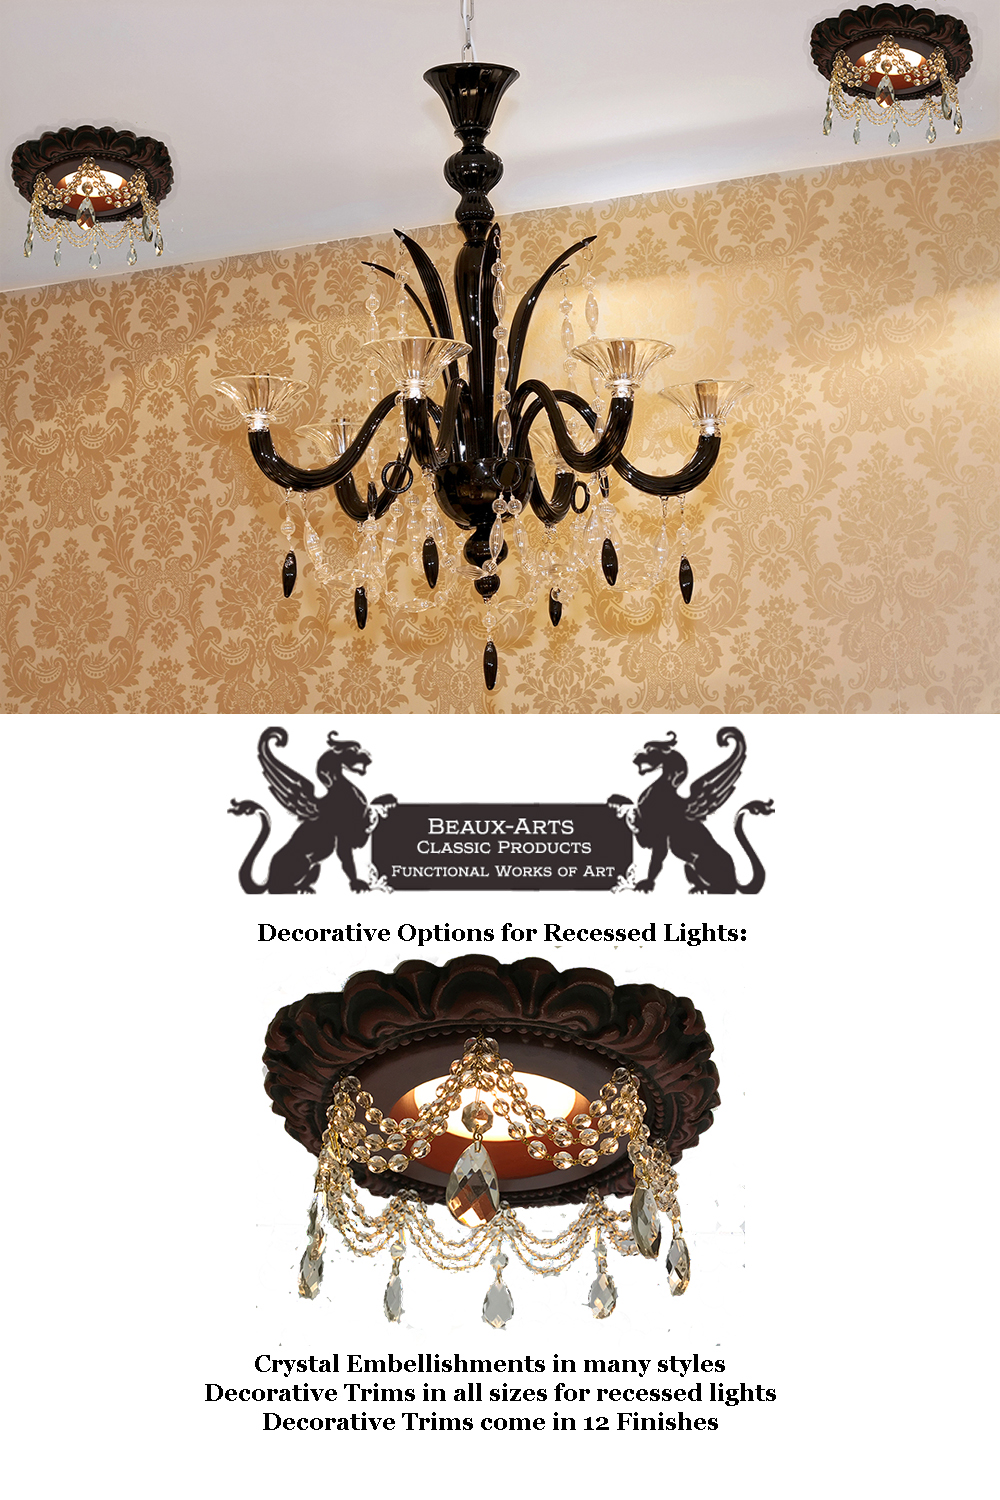 recessed chandelier with crystals matching the chandelier.